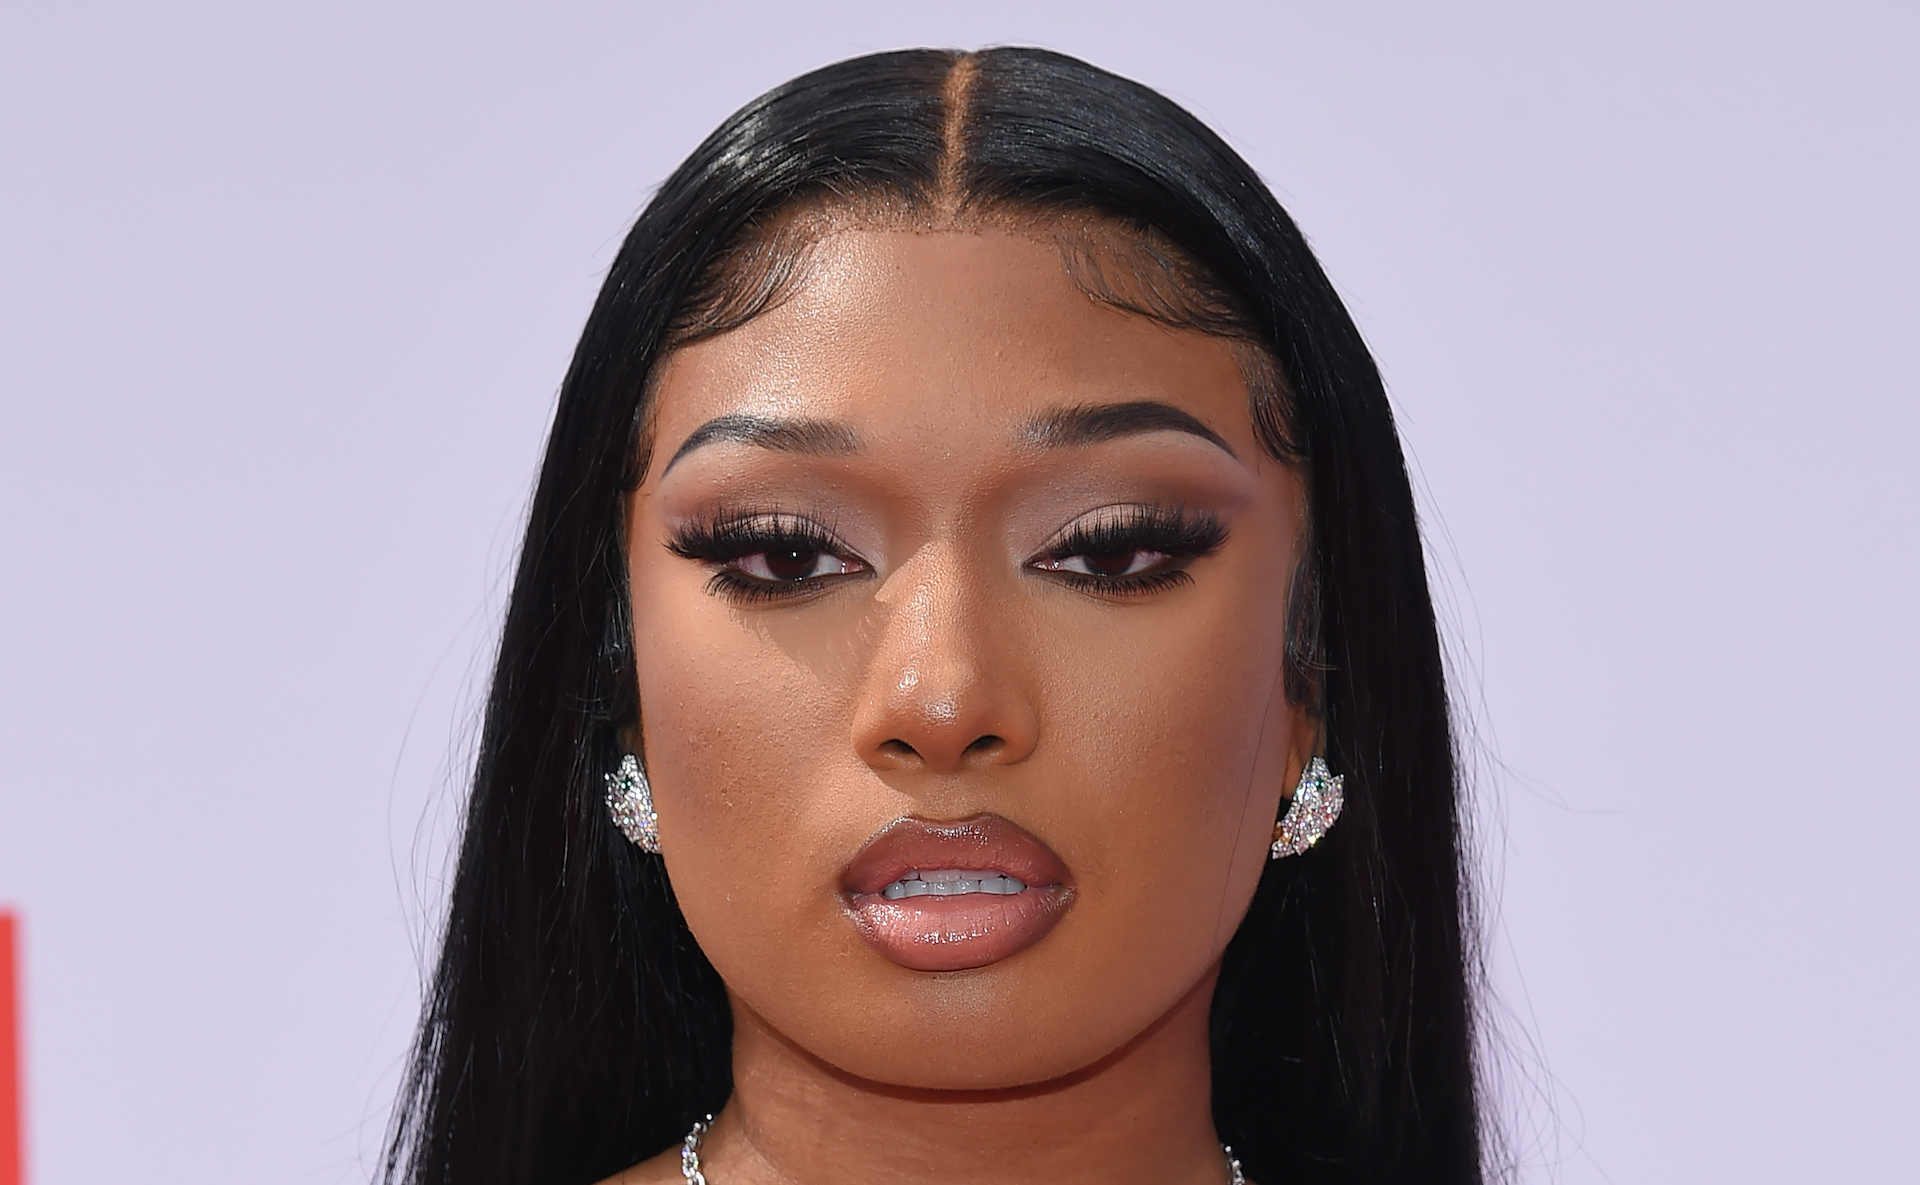 The Southern Black Girls And Women Consortium's executive director, Malikah Berry Rodgers, dedicated an open letter to Megan Thee Stallion, and it couldn't have been more special.